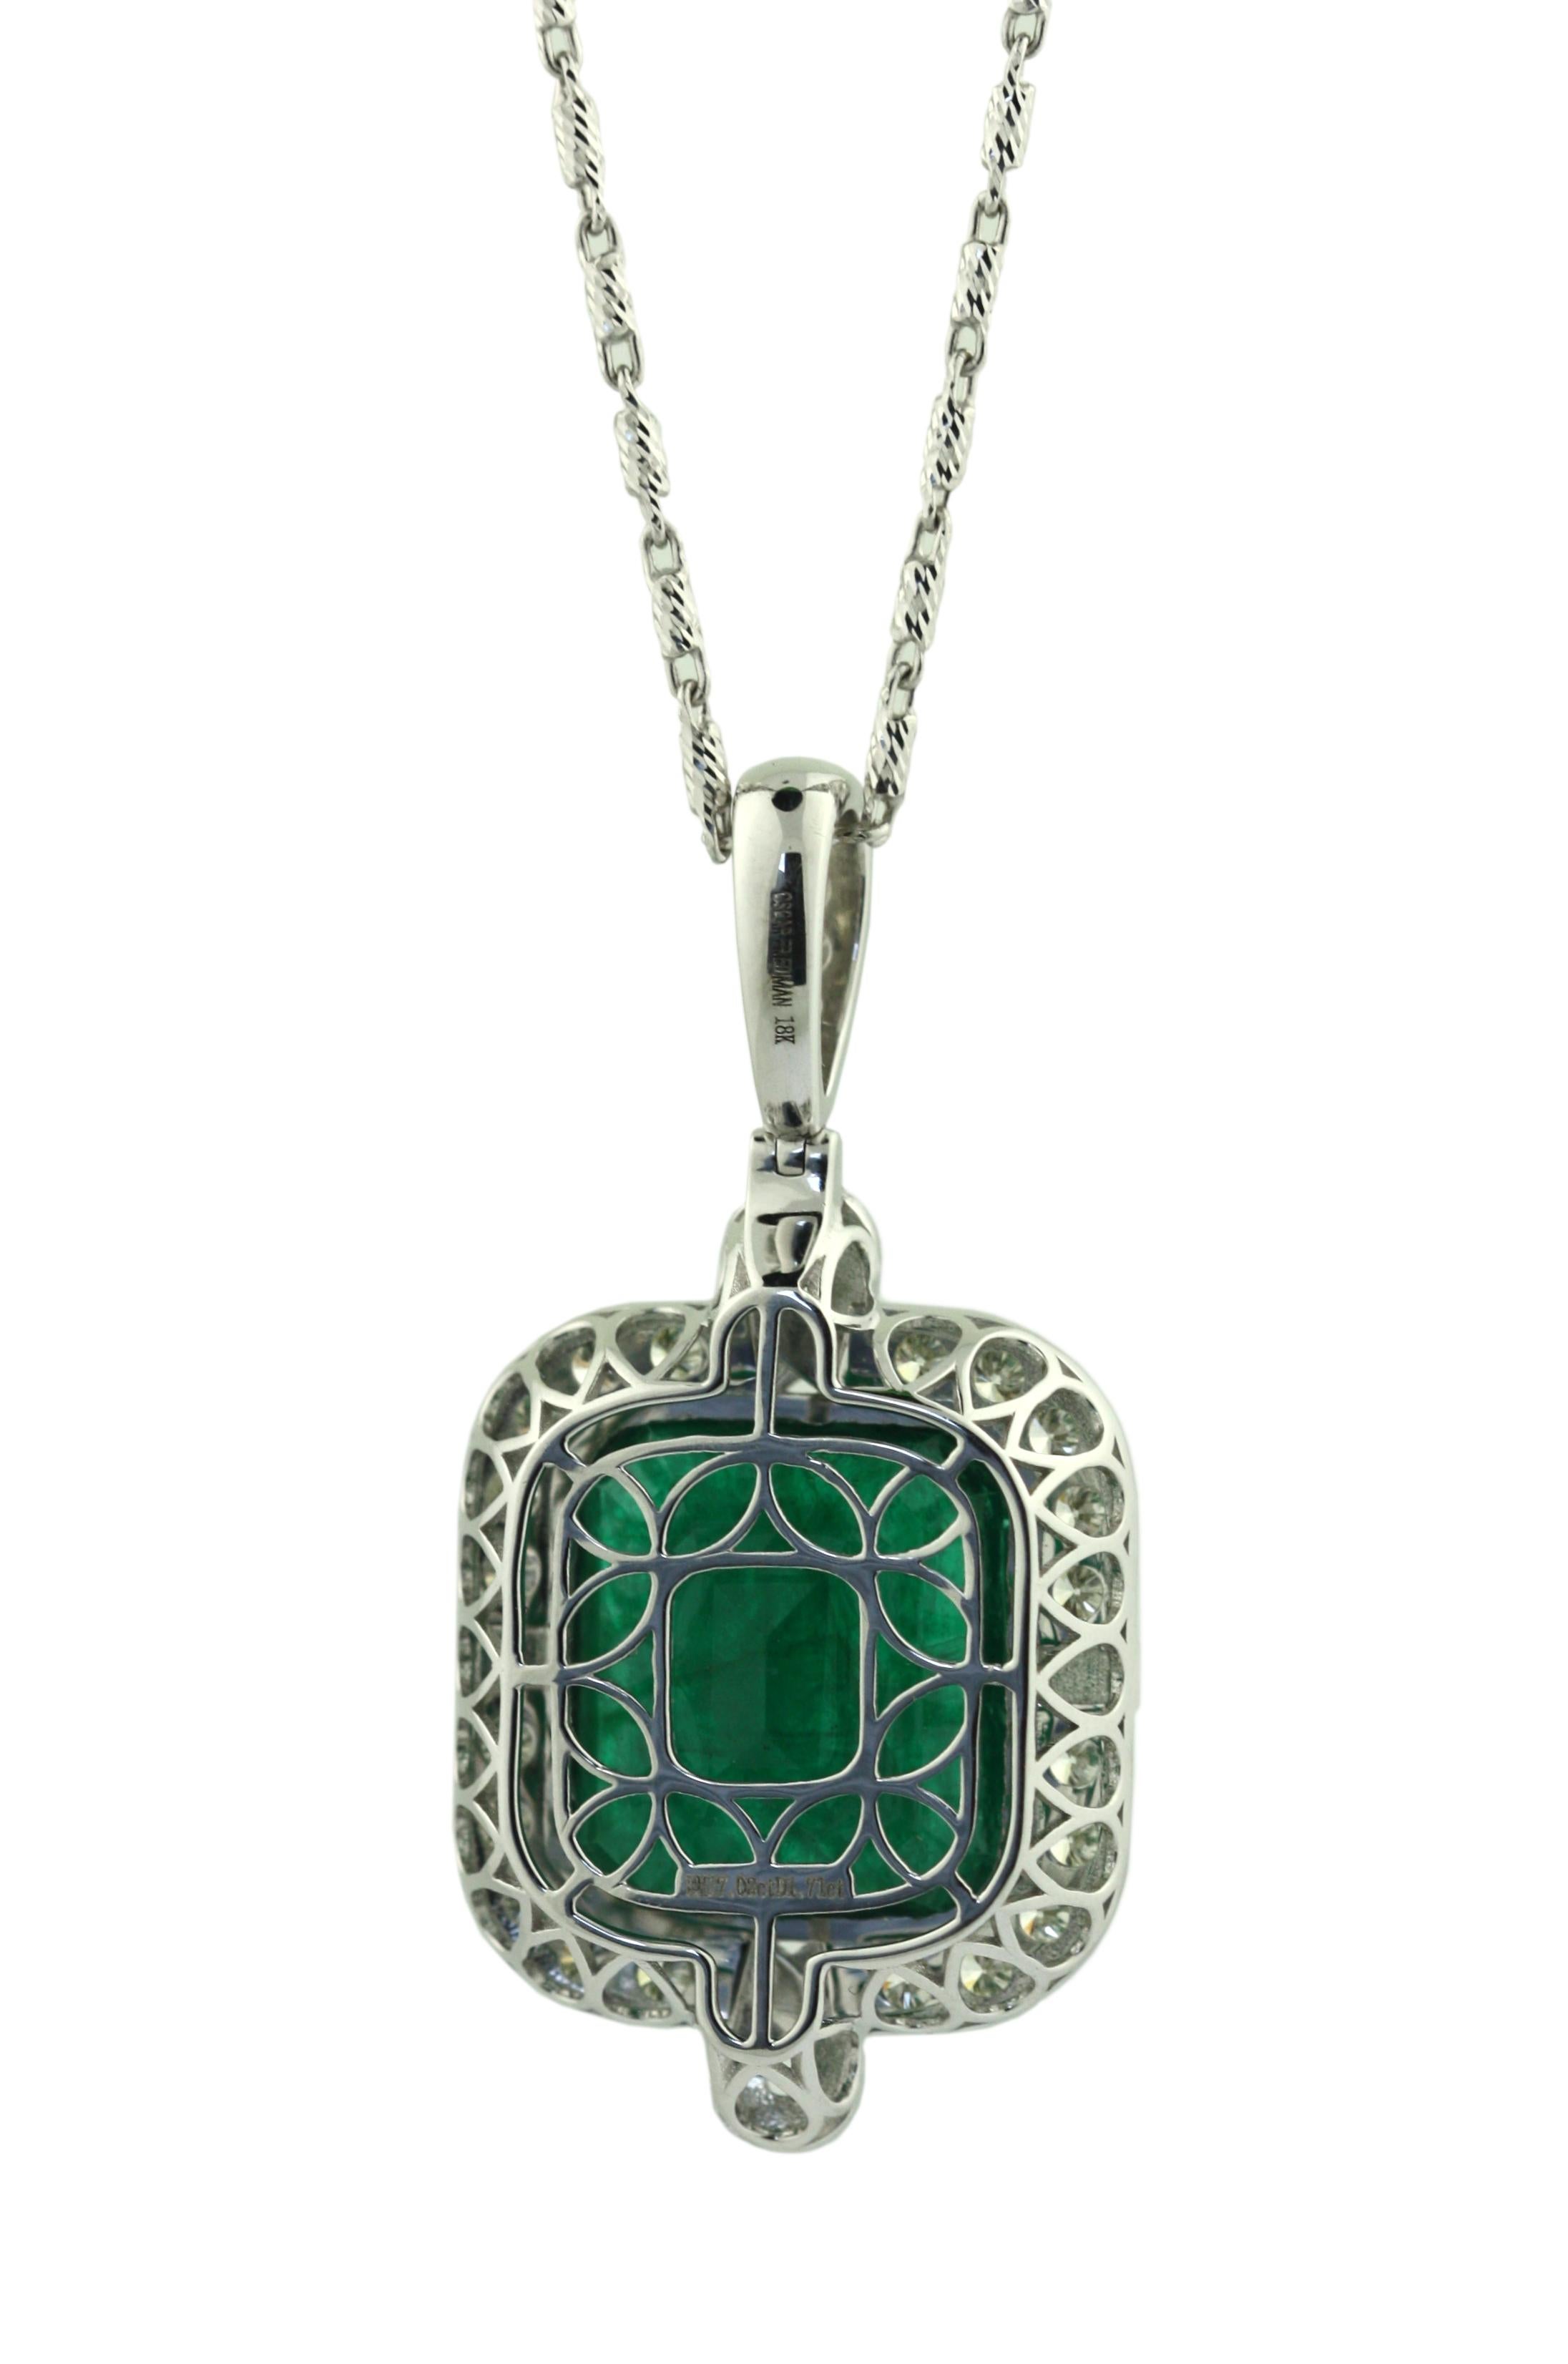 
18K White Gold Emerald and Diamond Pendant Necklace 
Featuring a Green Octagonal Step-Cut Natural Emerald beryl and Diamond Pendant
With Translucent Transparency and Excellent Symmetry 
Measuring 16.79 x 15.14 x 8.32 mm 
Weighing 17.02 carats